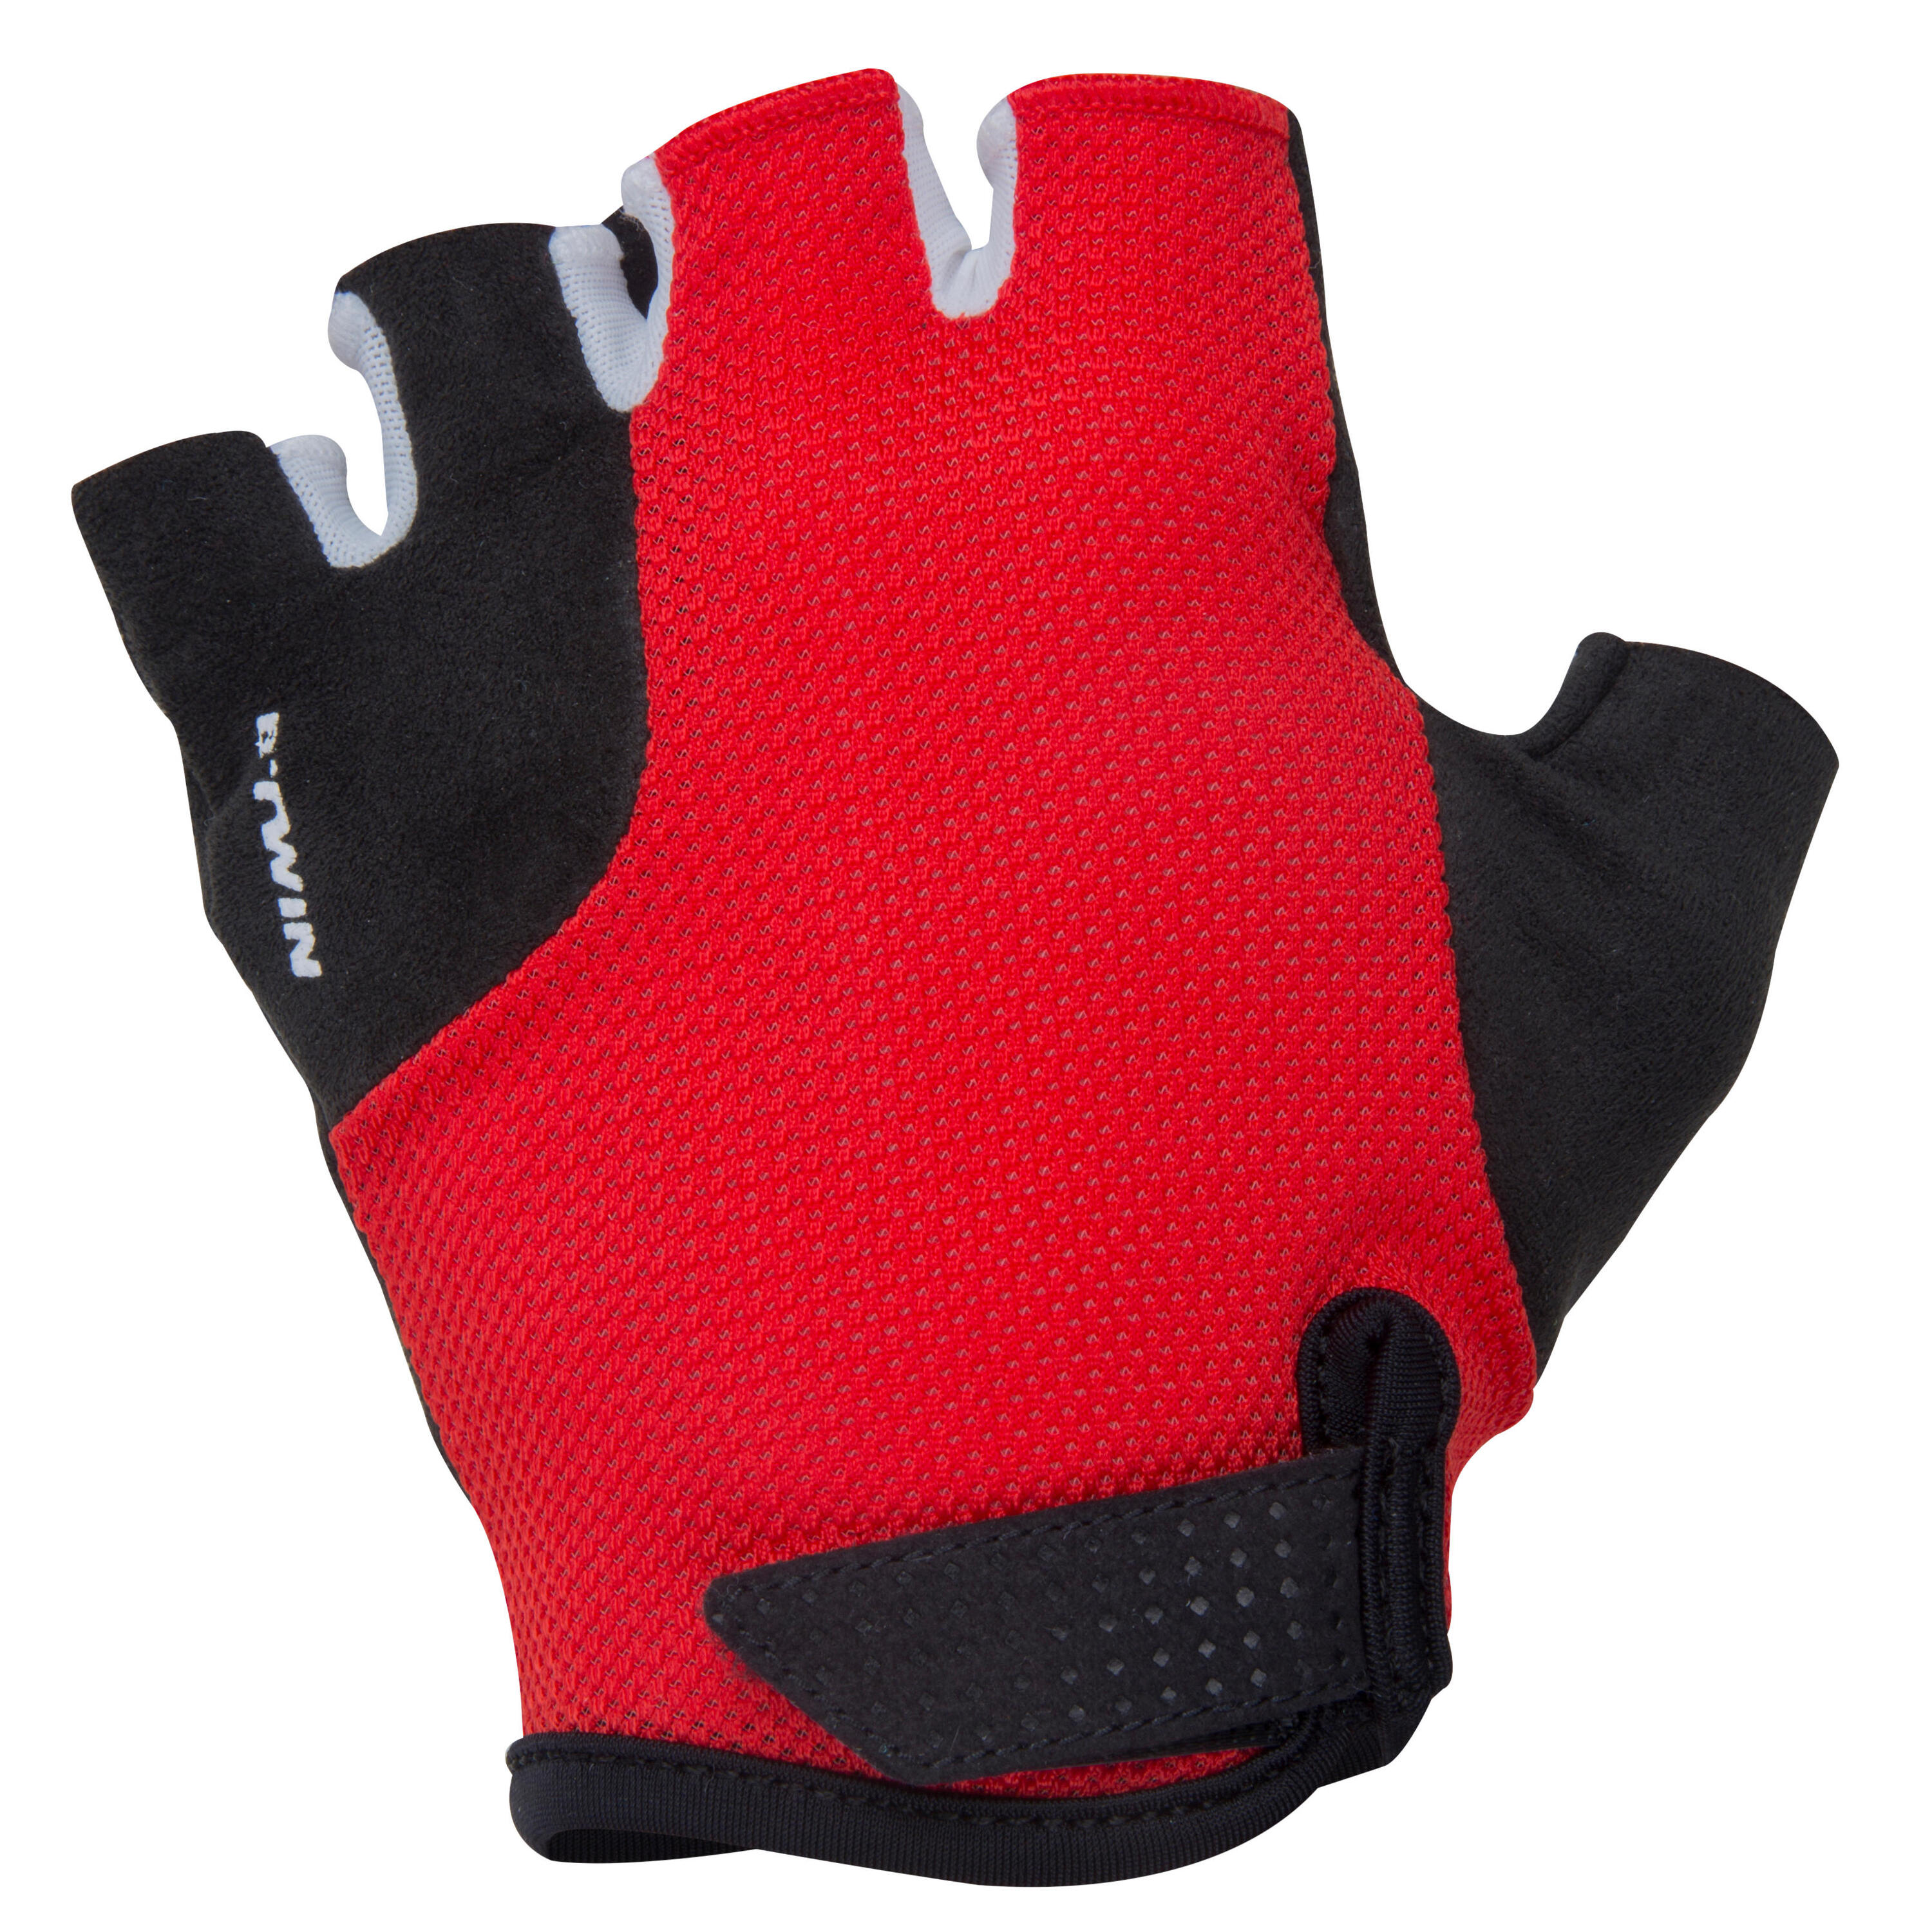 BTWIN 500 Kids' Cycling Gloves - Red